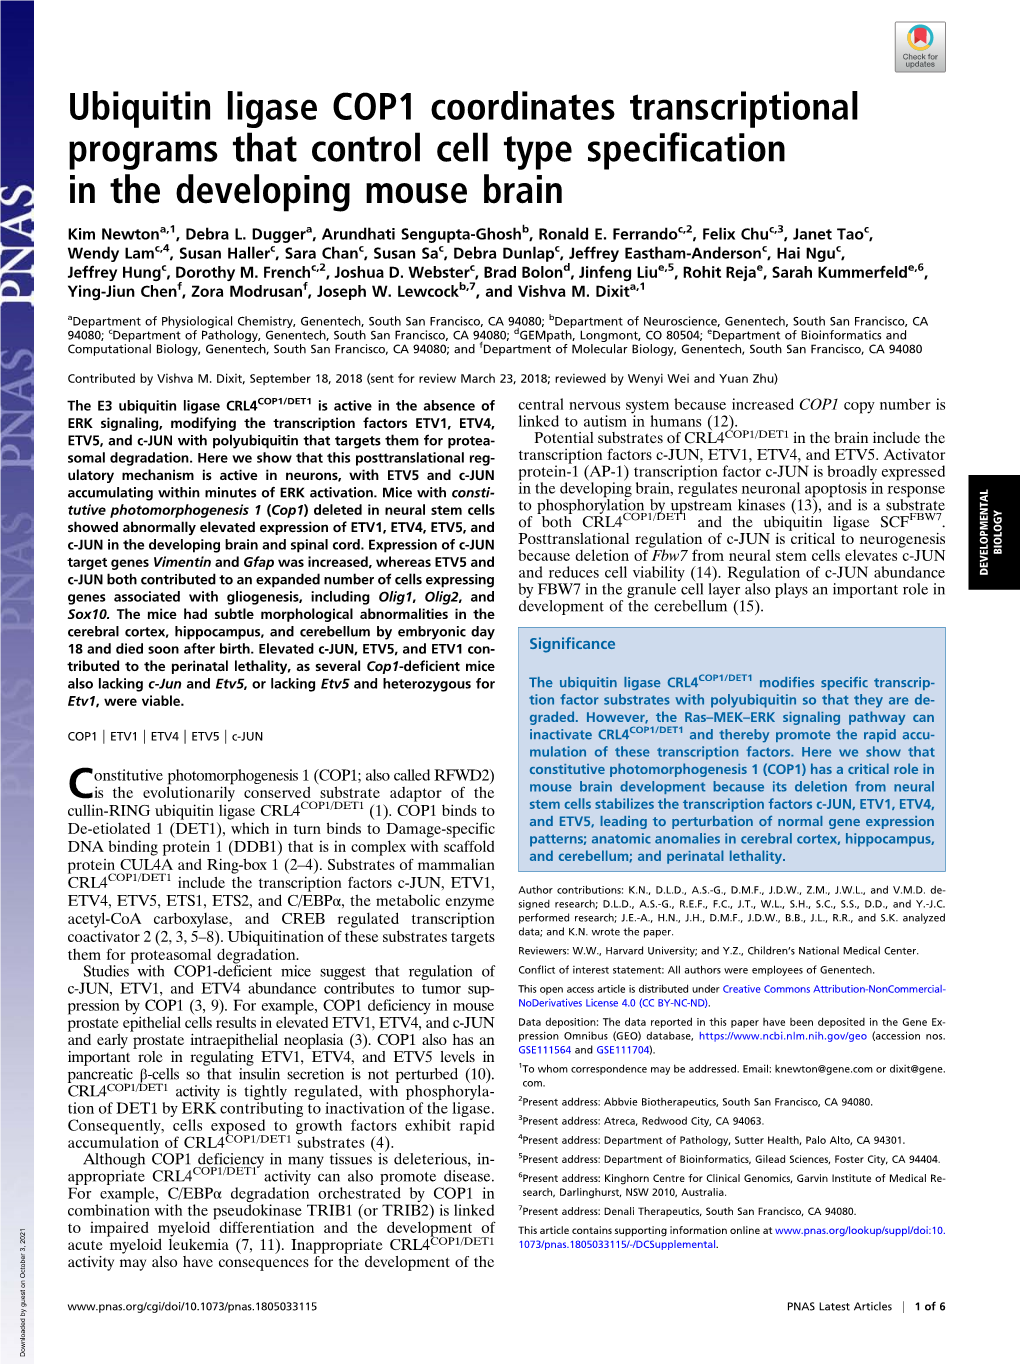 Ubiquitin Ligase COP1 Coordinates Transcriptional Programs That Control Cell Type Specification in the Developing Mouse Brain